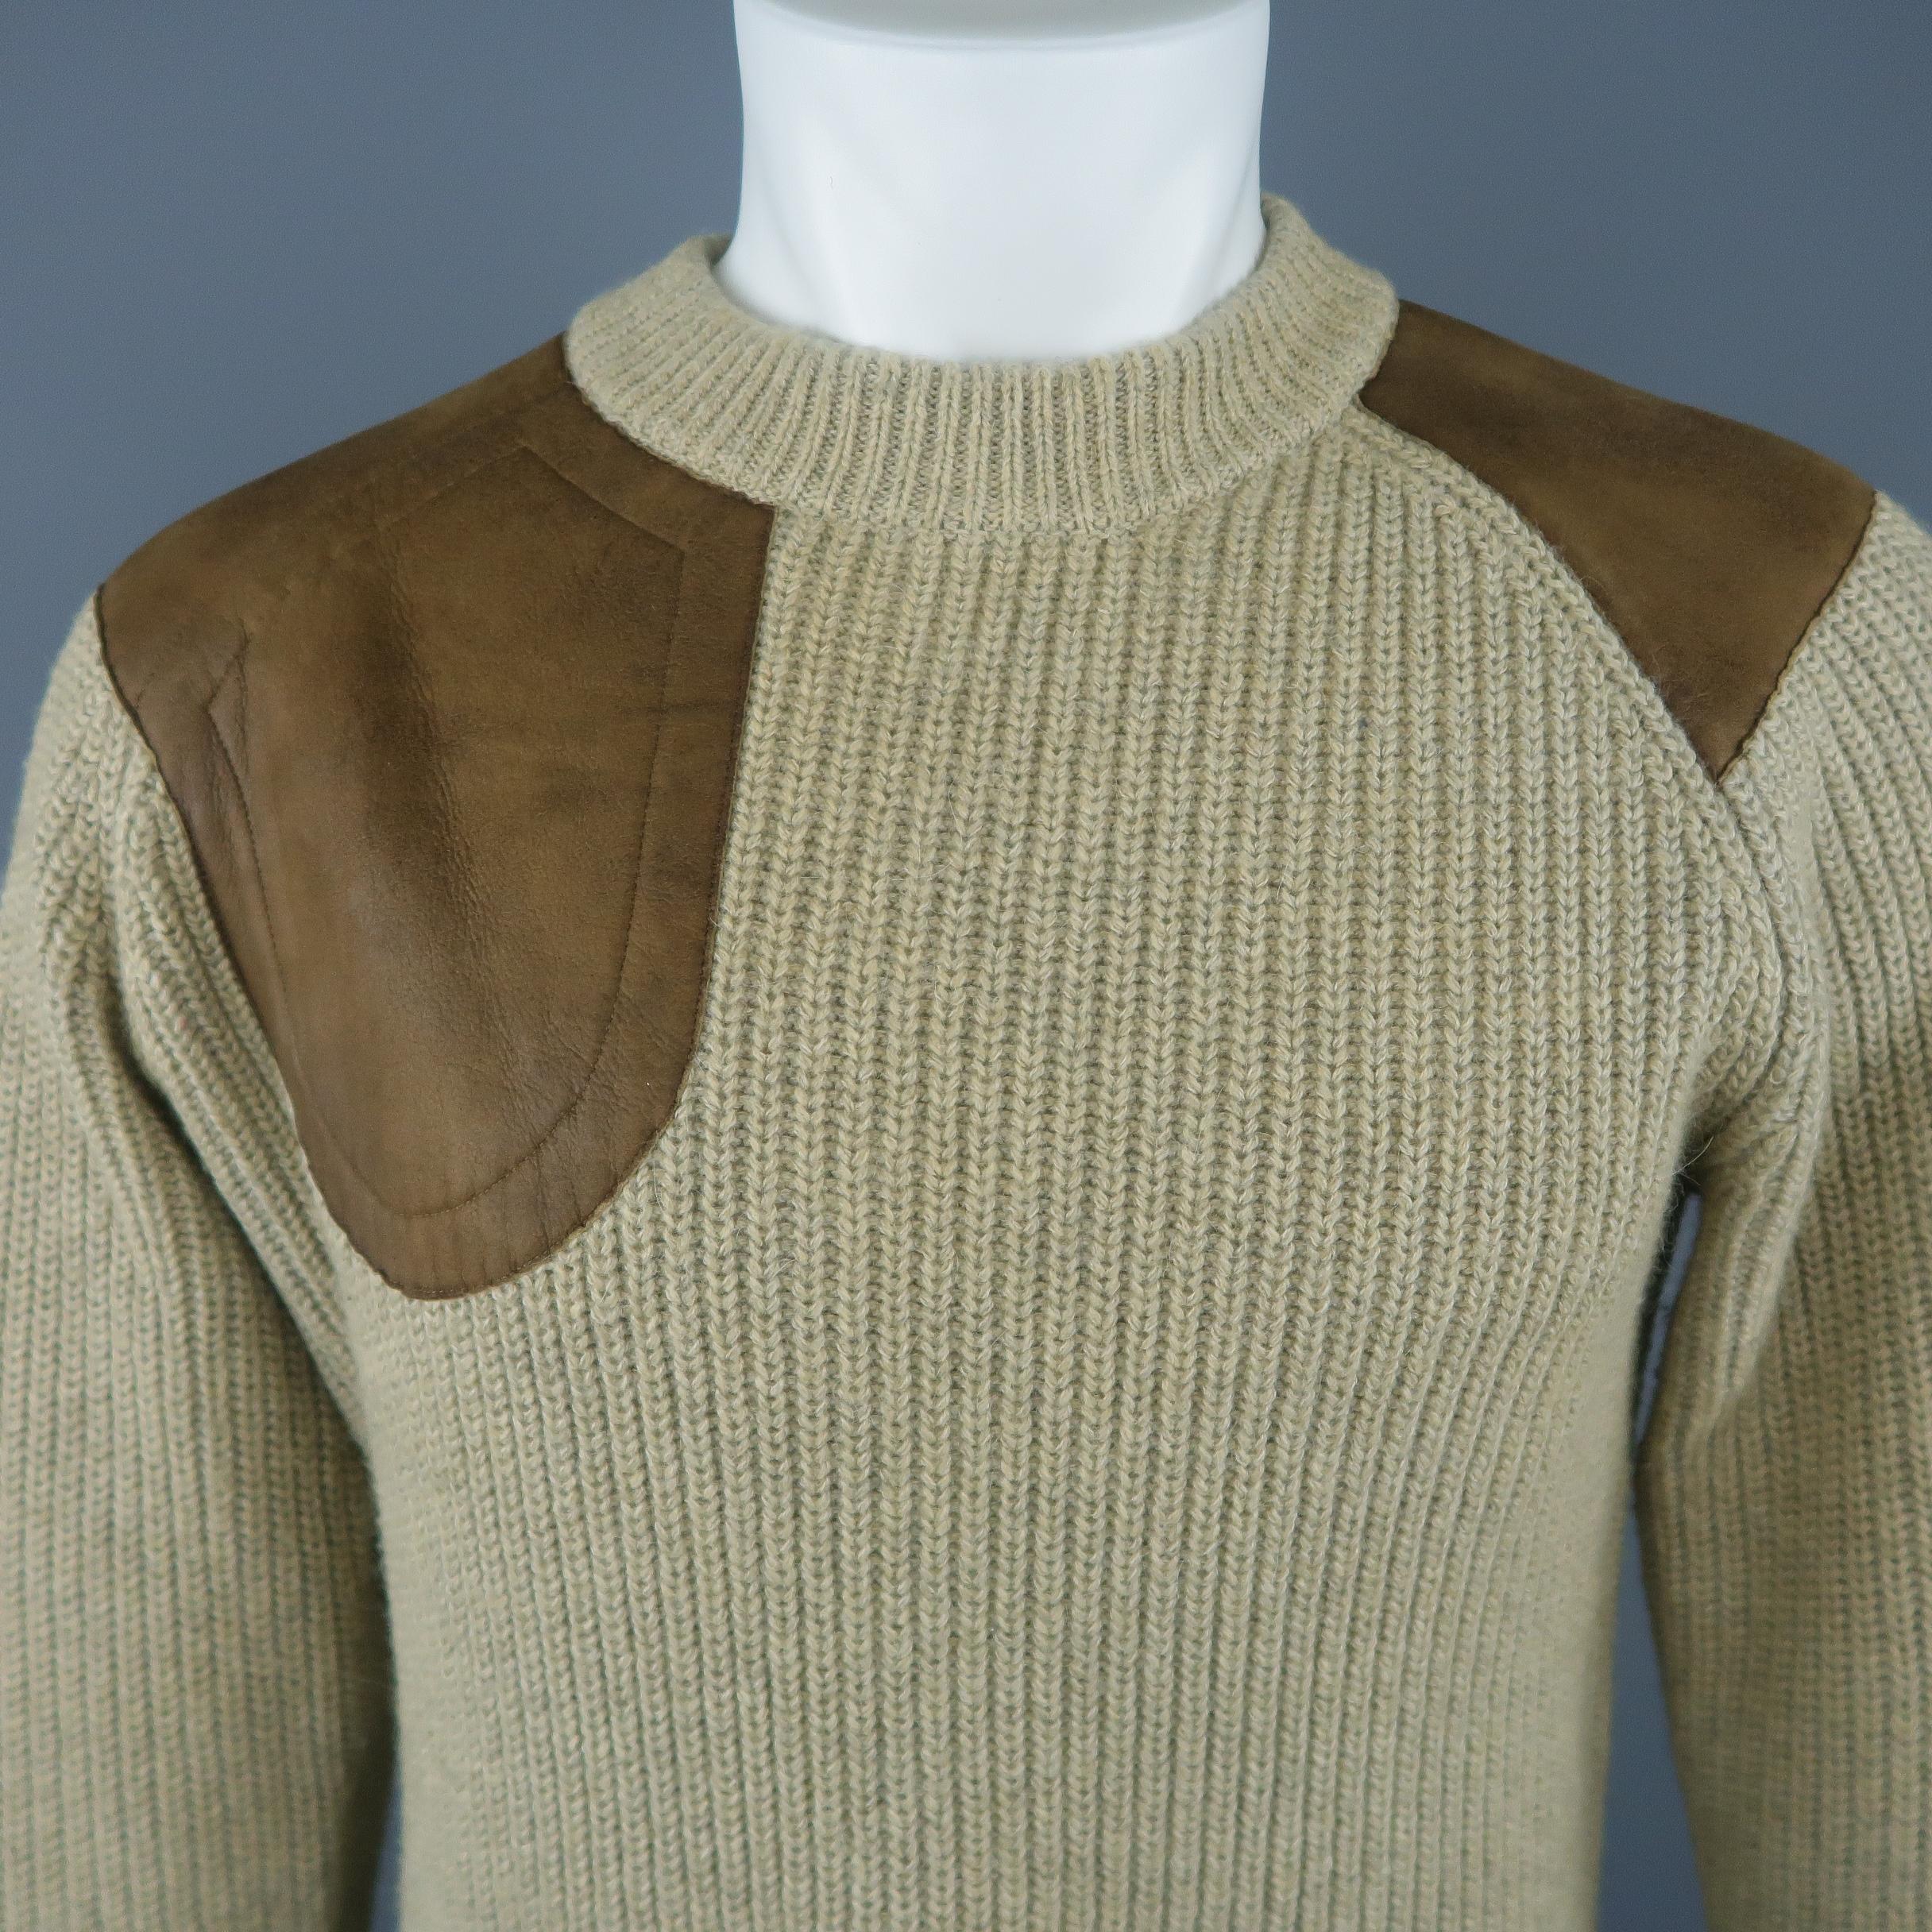 RALPH LAUREN RRL pullover sweater comes in beige cotton blend knit with brown leather patches and a ribbed crewneck and cuffs.
 
Excellent Pre-Owned Condition.
Marked: M
 
Measurements:
 
Shoulder: 18.5 in.
Chest: 44 in.
Sleeve: 28 in.
Length: 27 in.